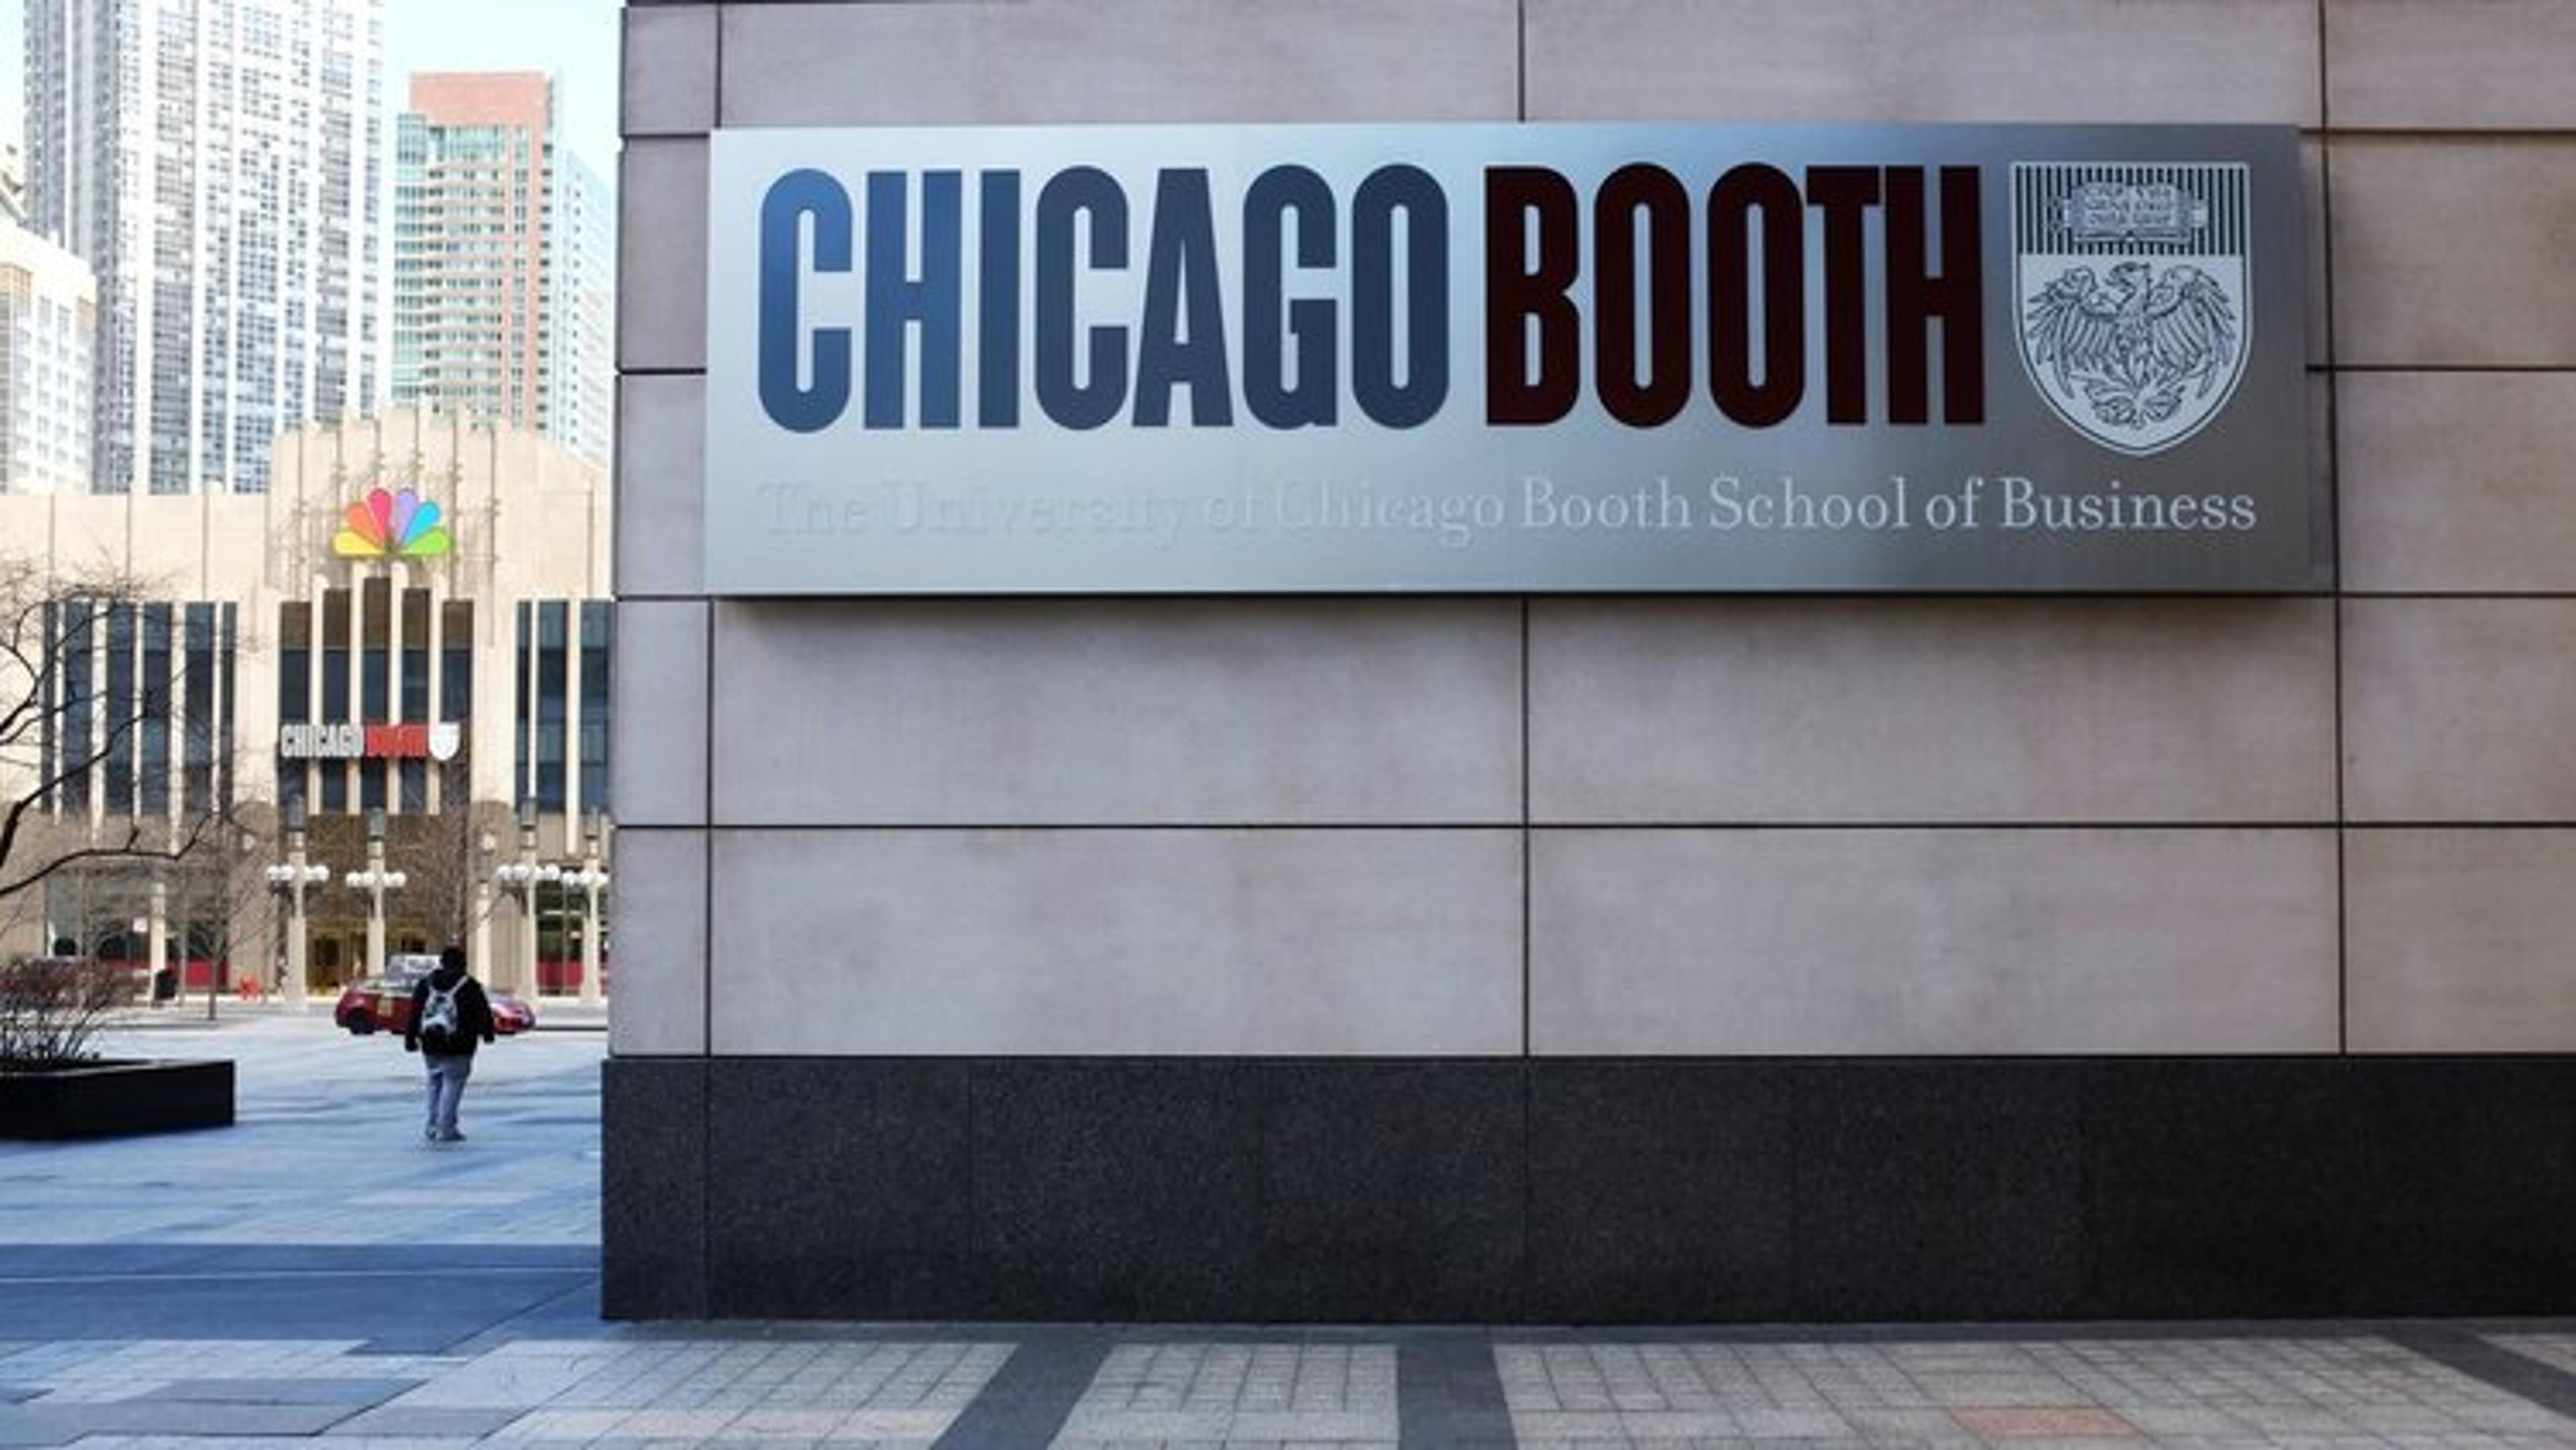 MBA Masterclass Series  The University of Chicago Booth School of Business